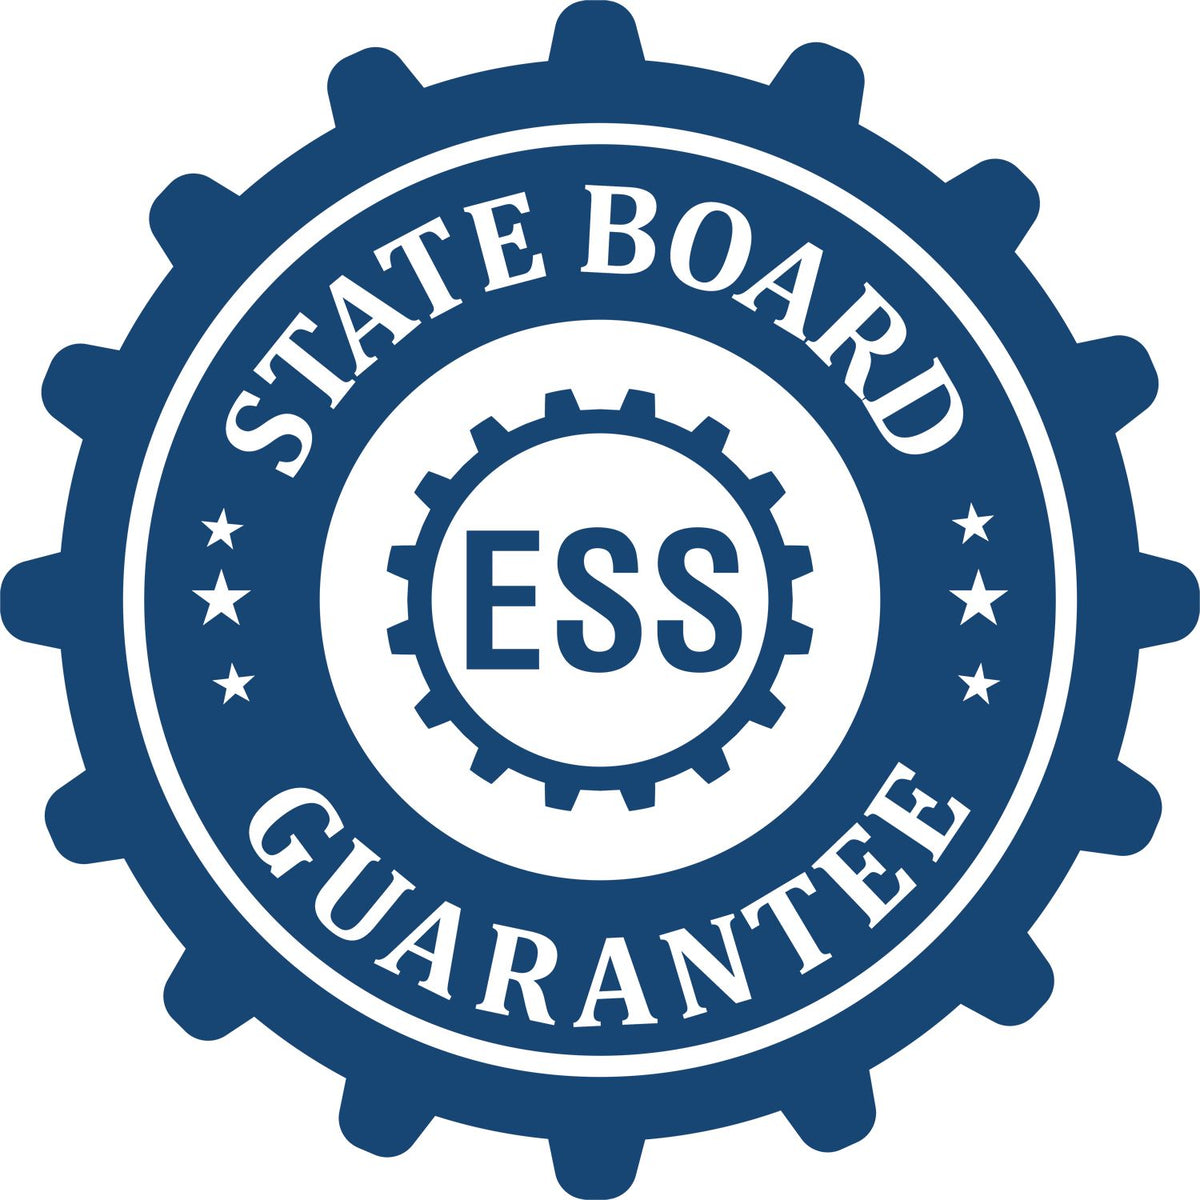 An emblem in a gear shape illustrating a state board guarantee for the Hybrid Ohio Engineer Seal